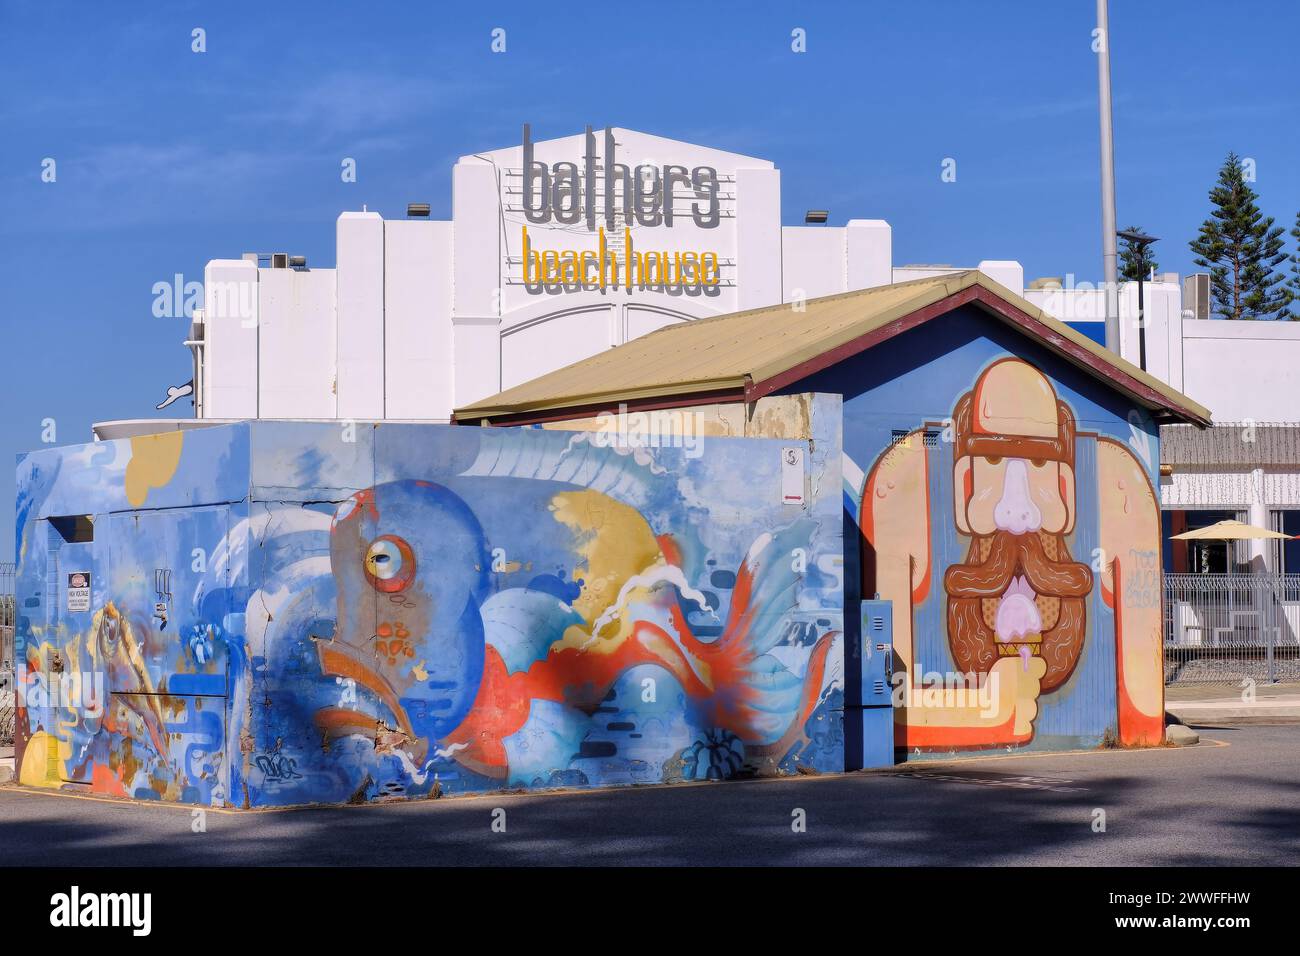 Street art on industrial building and Bathers Beach House restaurant in Fremantle, Perth, Western Australia Stock Photo